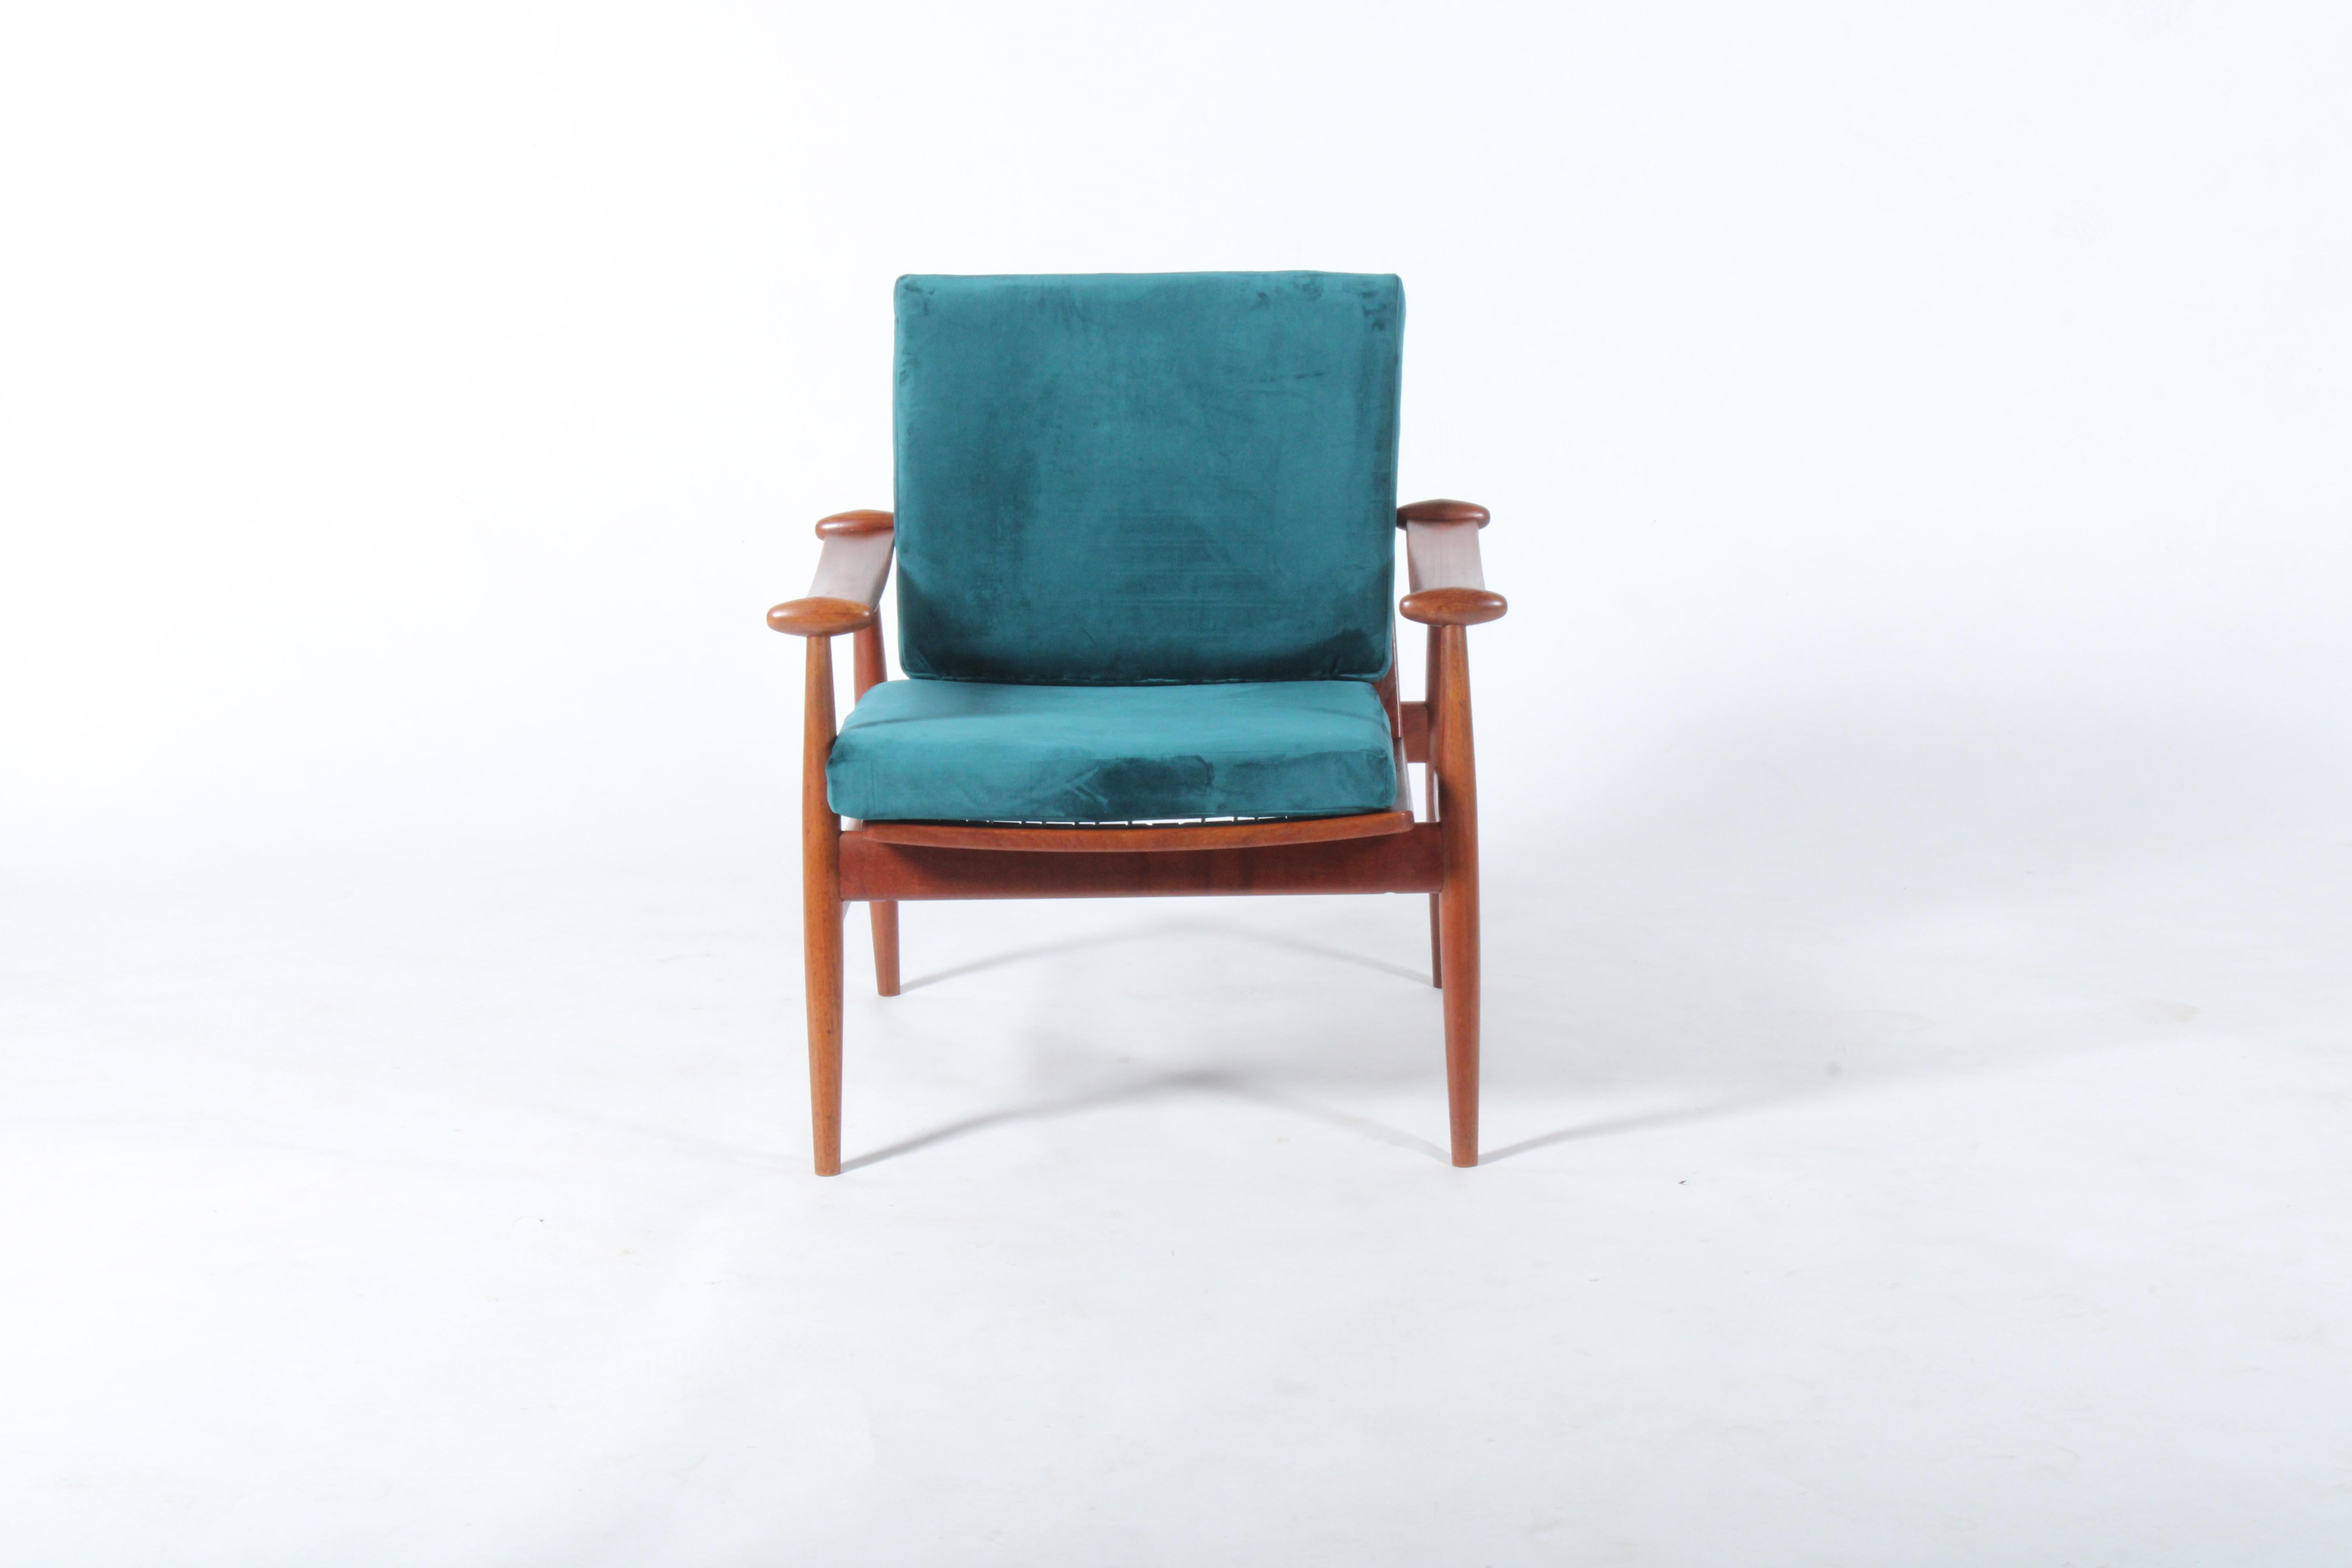 Hand-Crafted Exquisite Mid Century Danish Spade Chair By Finn Juhl For France & Son In Teak For Sale